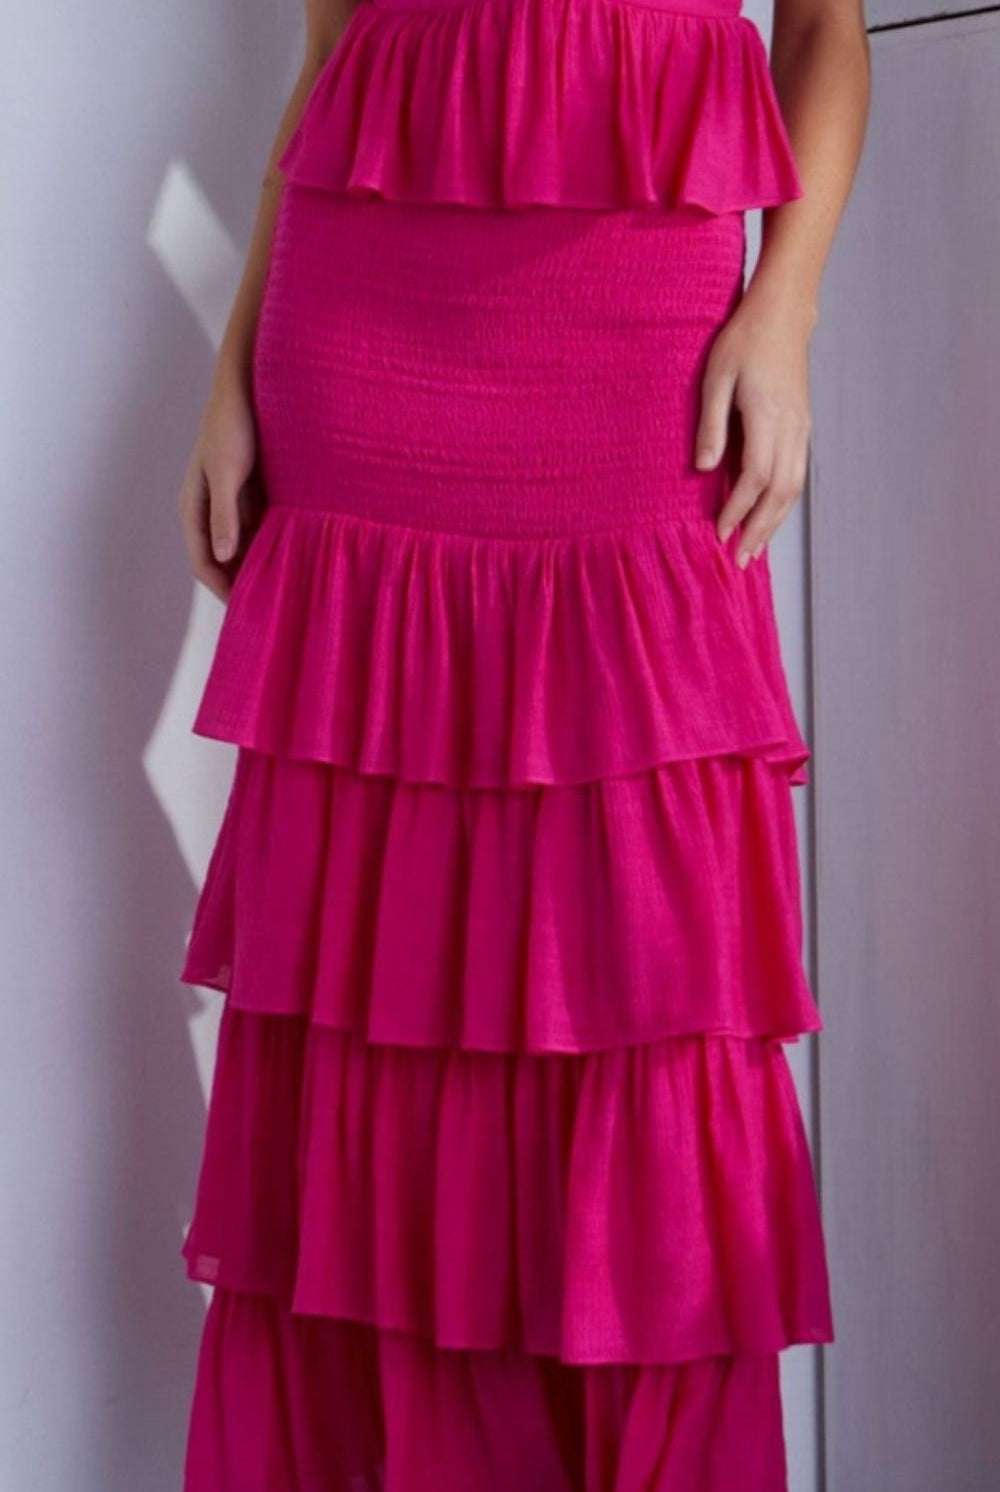 A woman wearing a vibrant pink ruffled dress with layered detailing and a sleeveless design, exuding elegance and playful femininity.